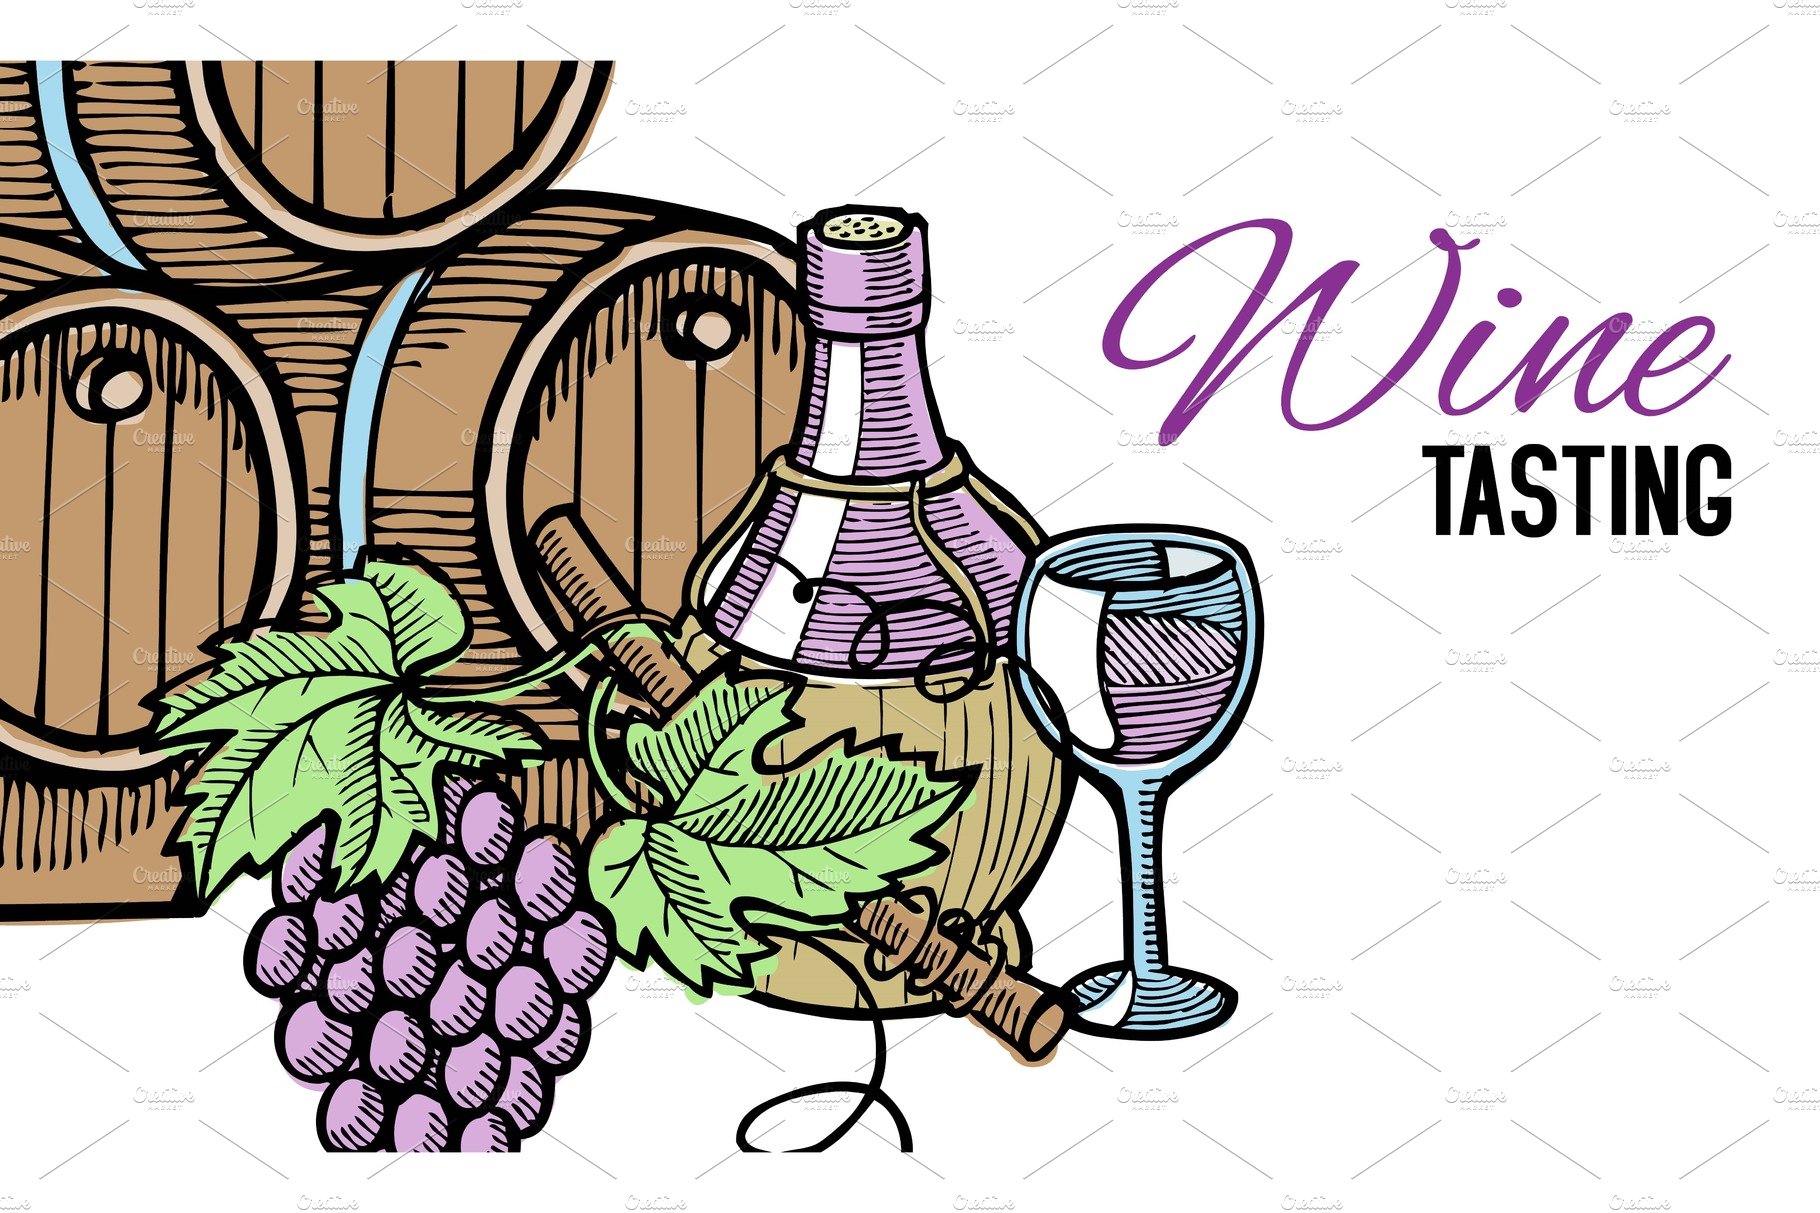 Wine barrel, hand drawn, with grape cover image.